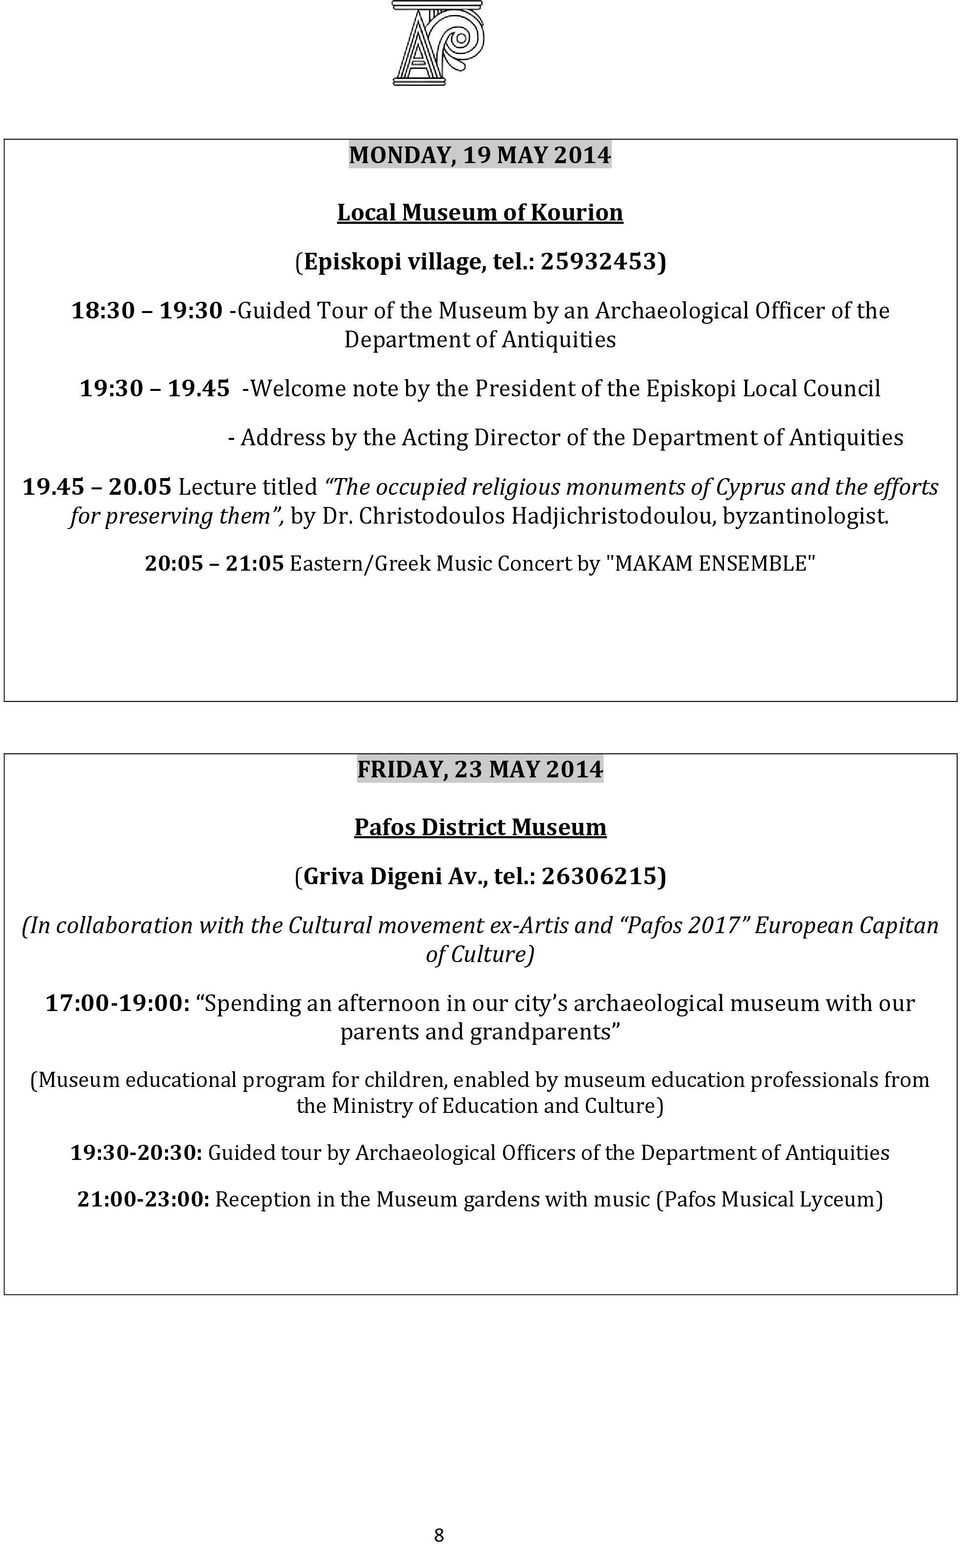 05 Lecture titled The occupied religious monuments of Cyprus and the efforts for preserving them, by Dr. Christodoulos Hadjichristodoulou, byzantinologist.